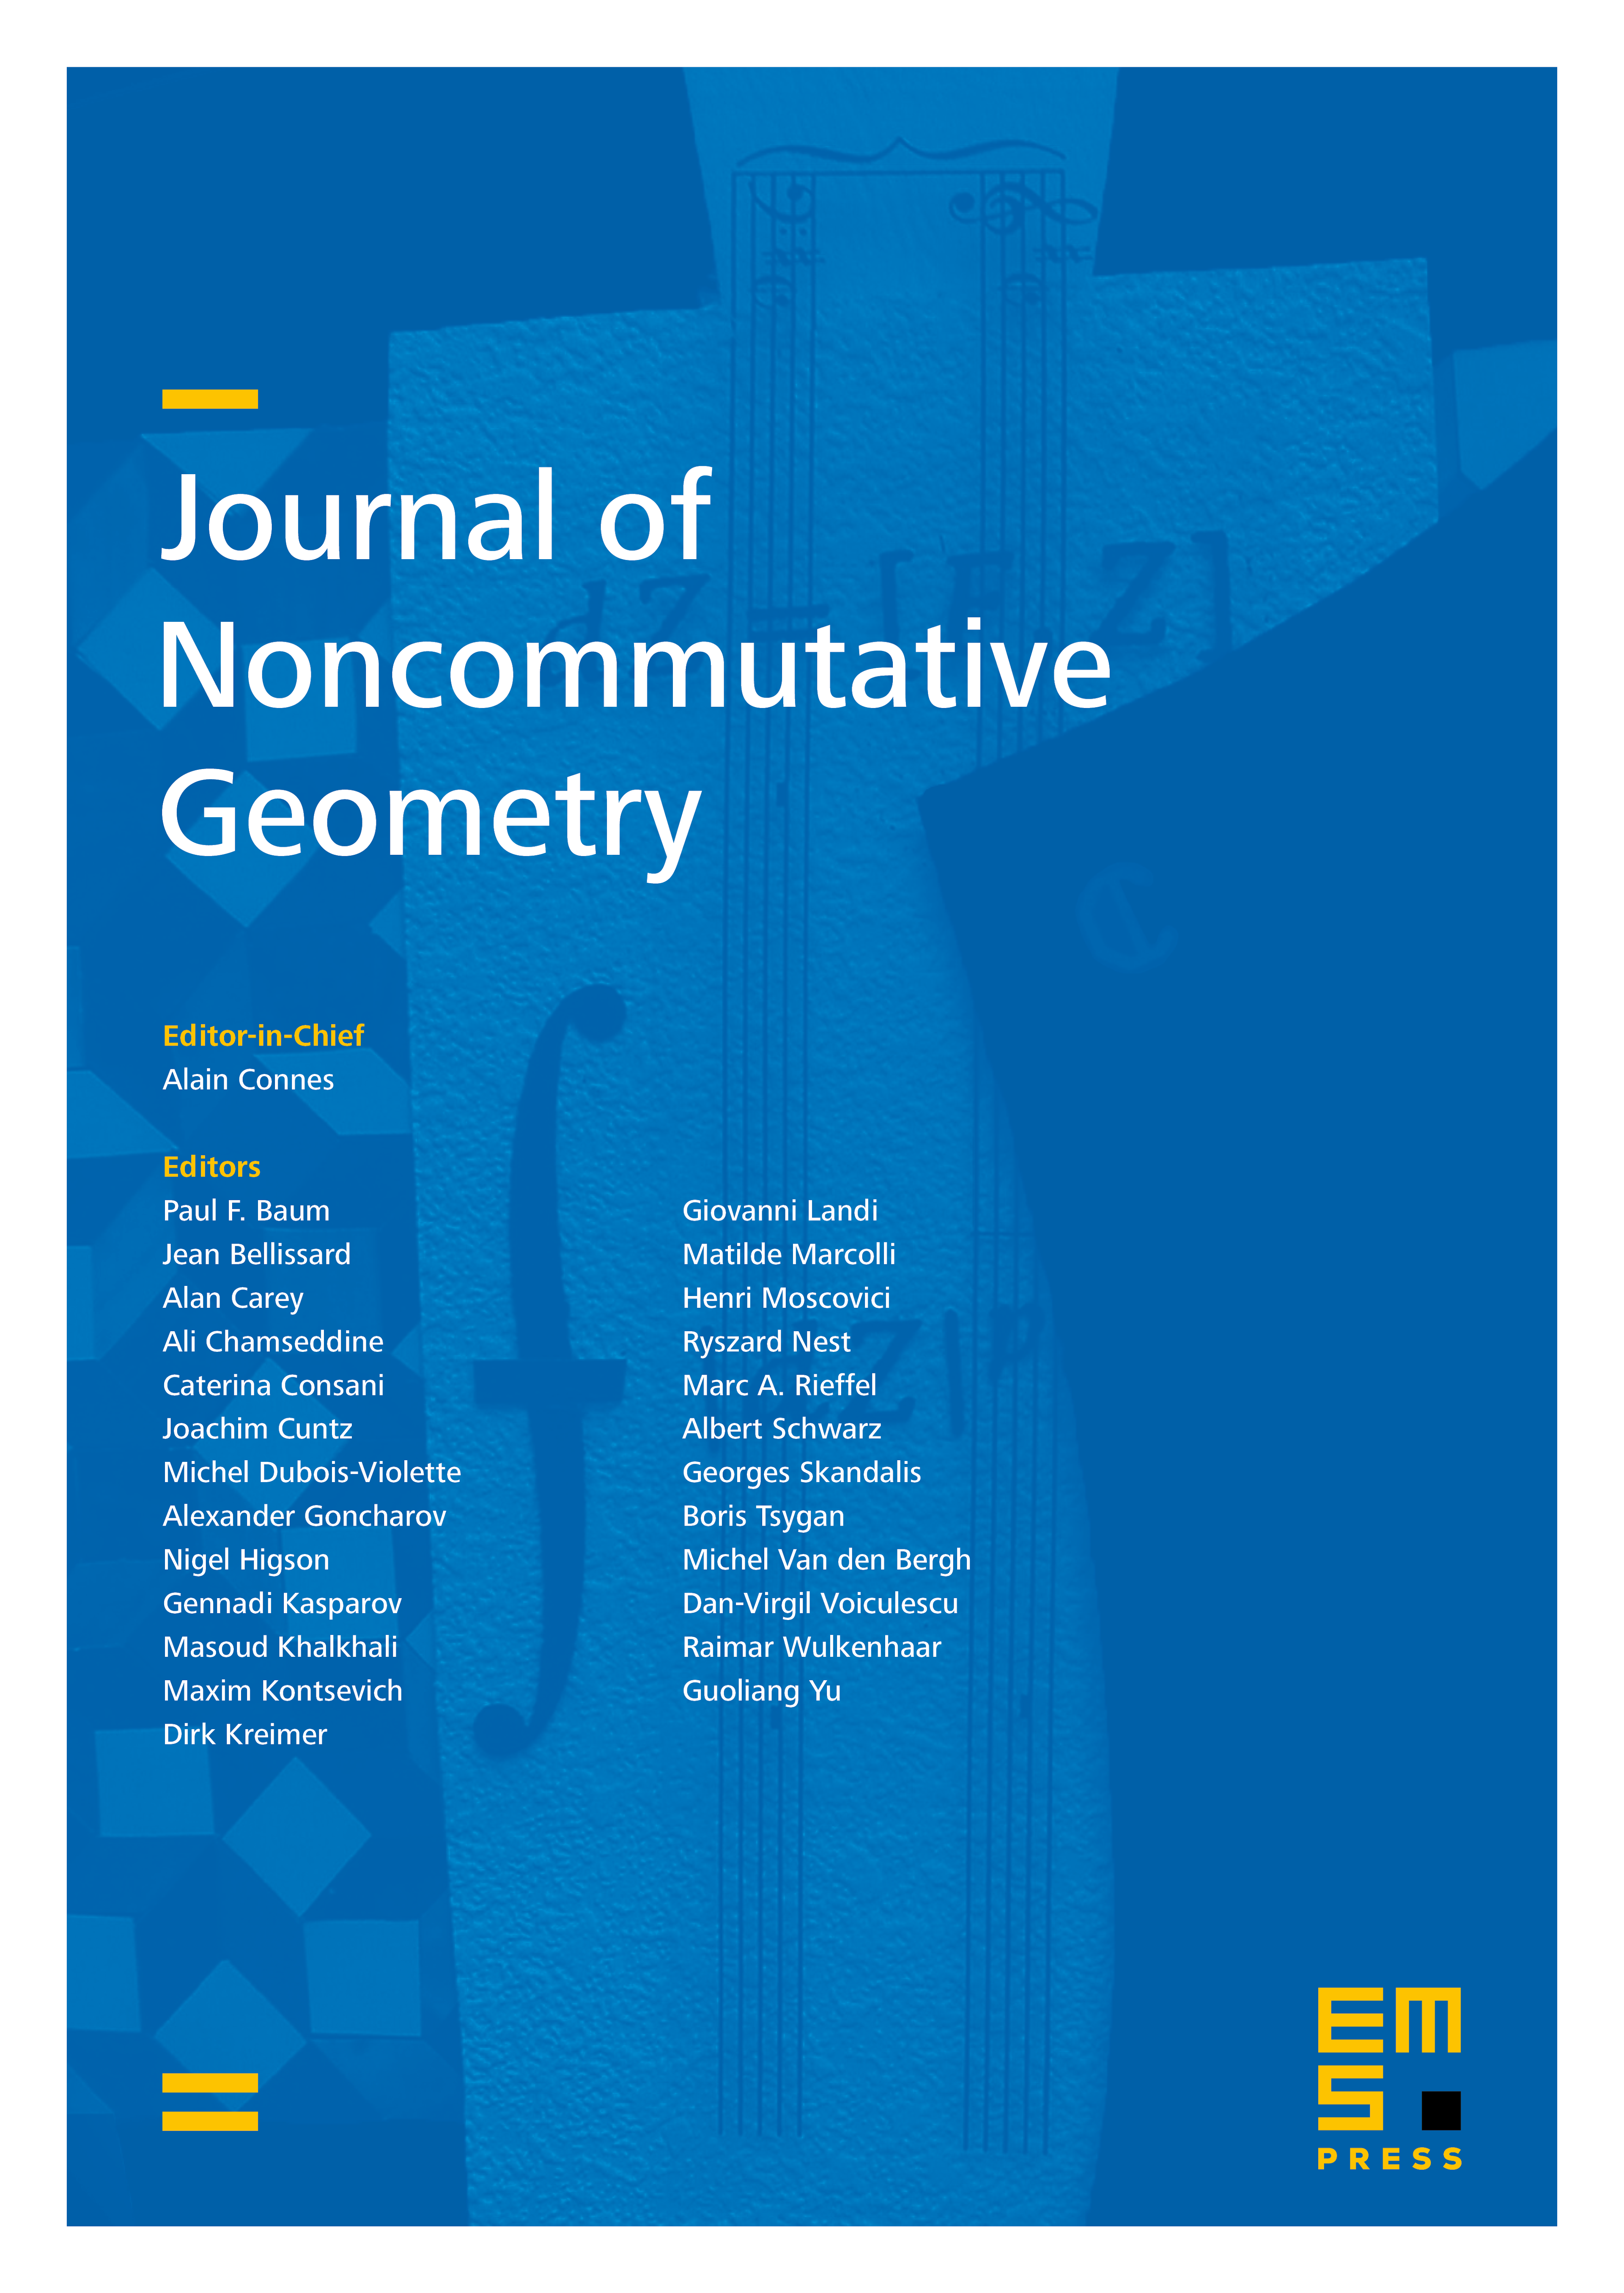 Superconformal nets and noncommutative geometry cover